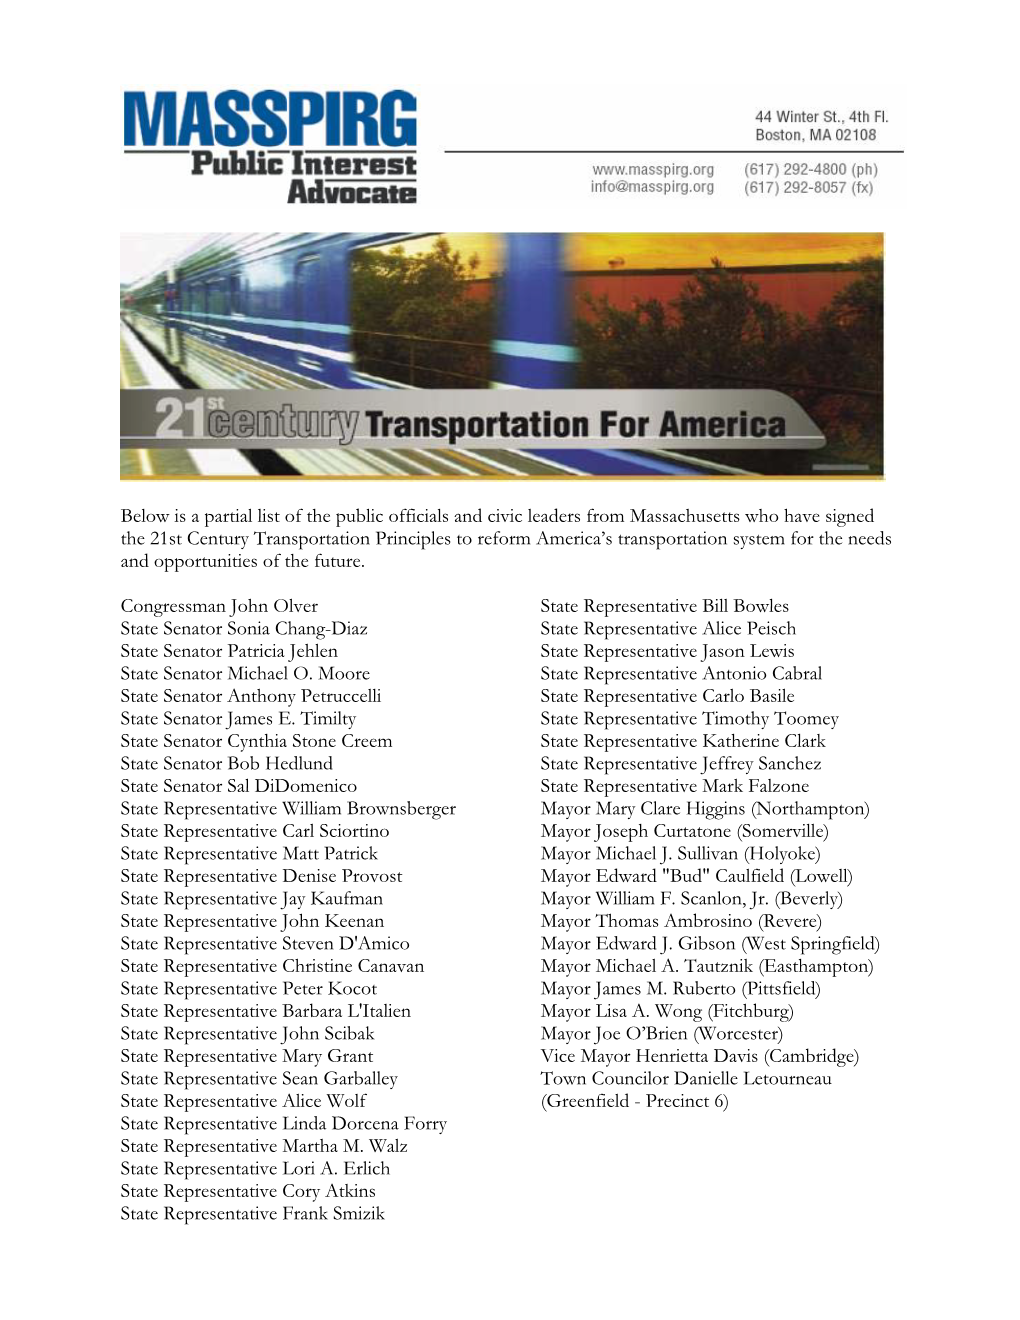 Below Is a Partial List of the Public Officials and Civic Leaders From